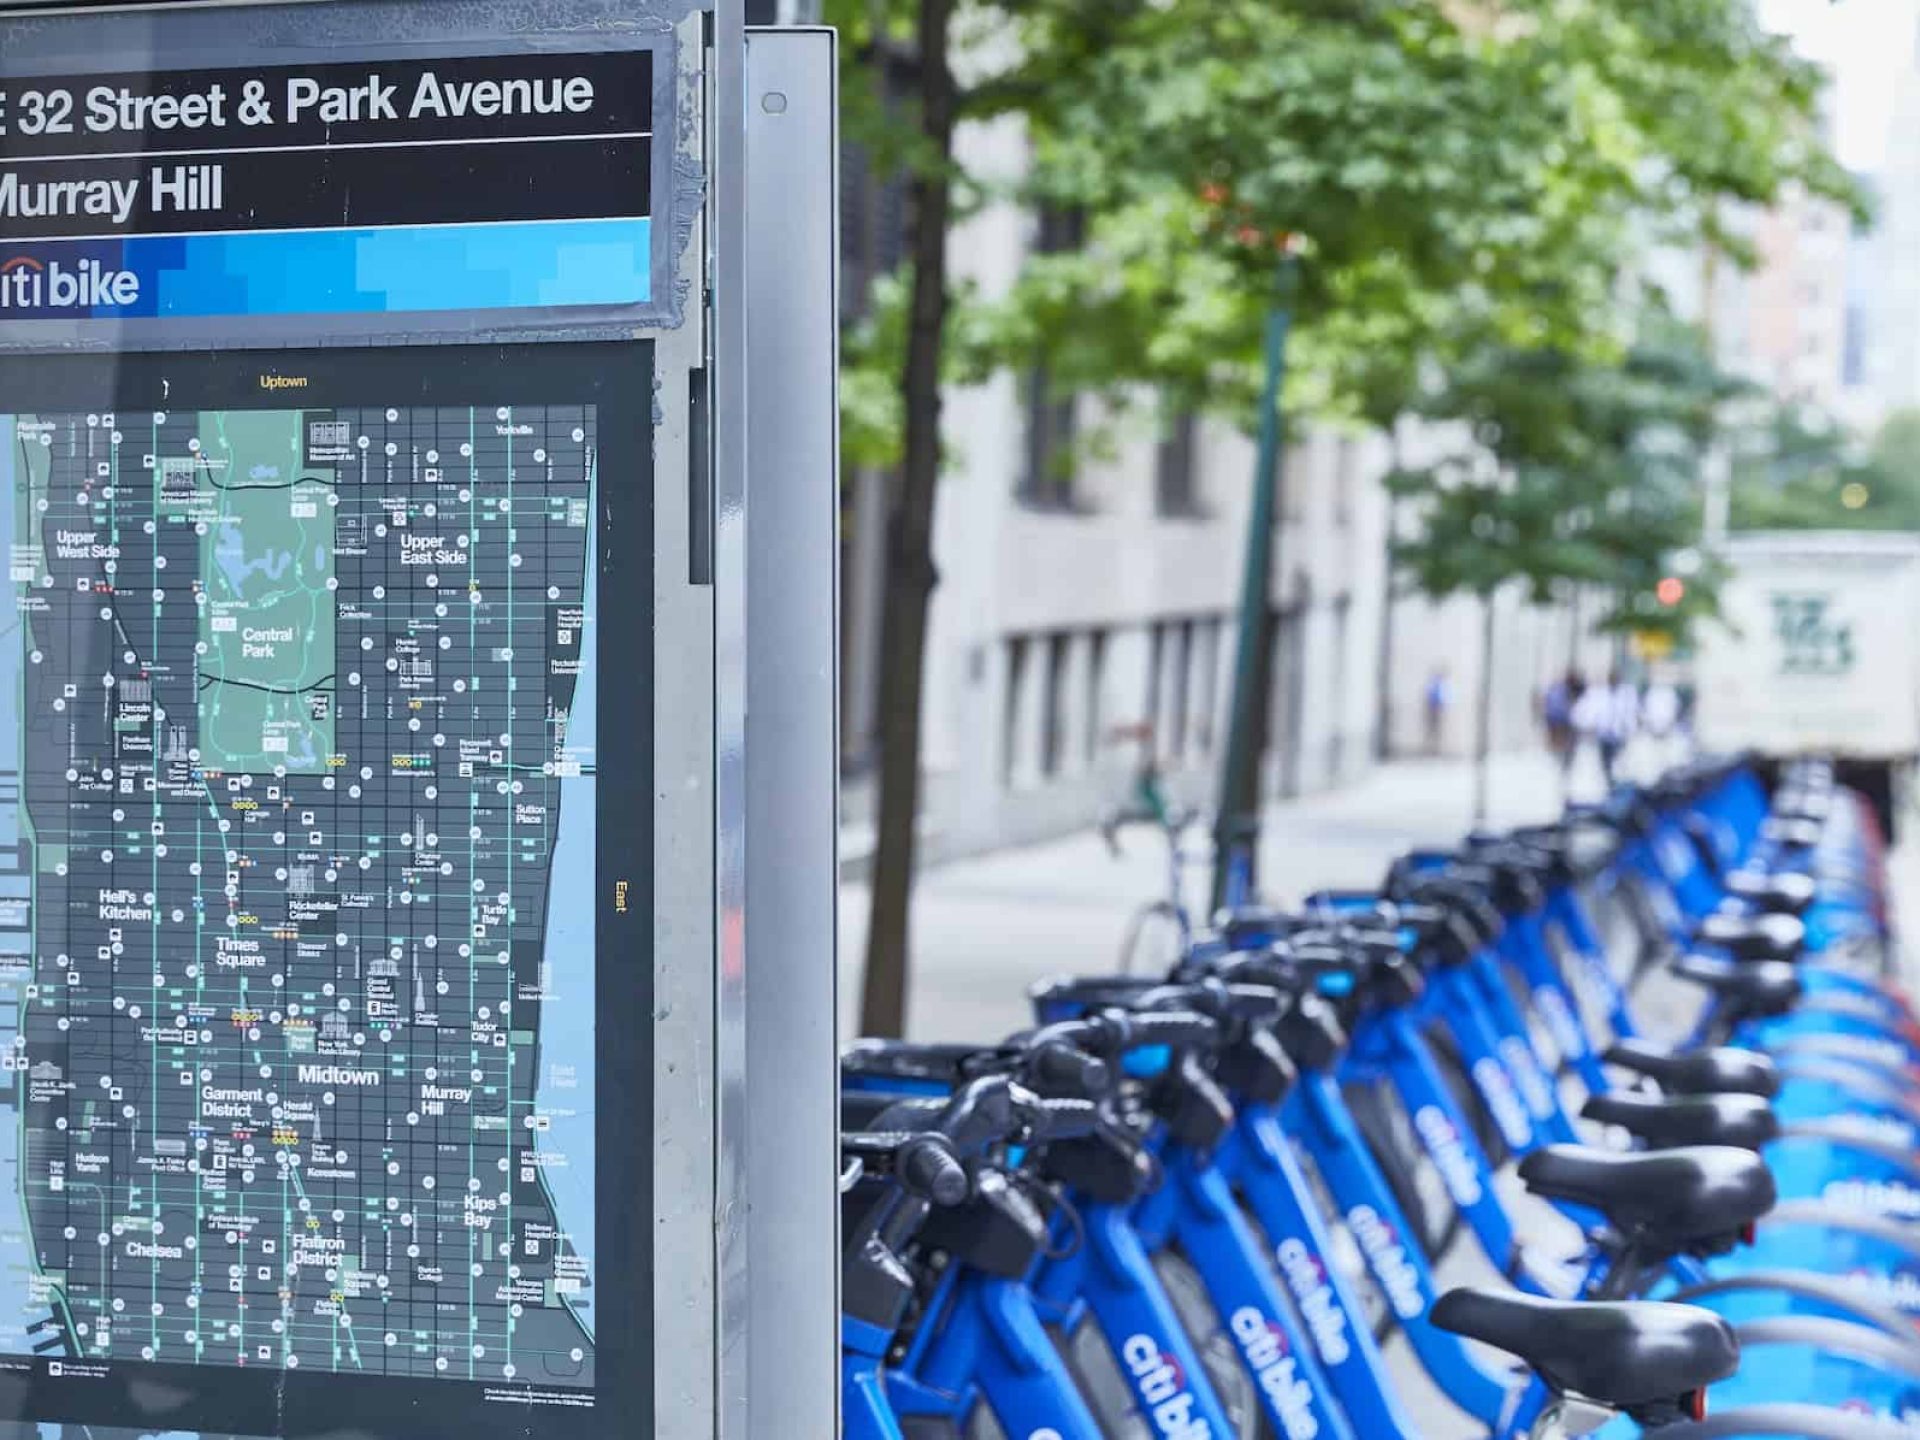 Close up of New York City map with blue Citi bikes in the background. Map shows public transportation information.